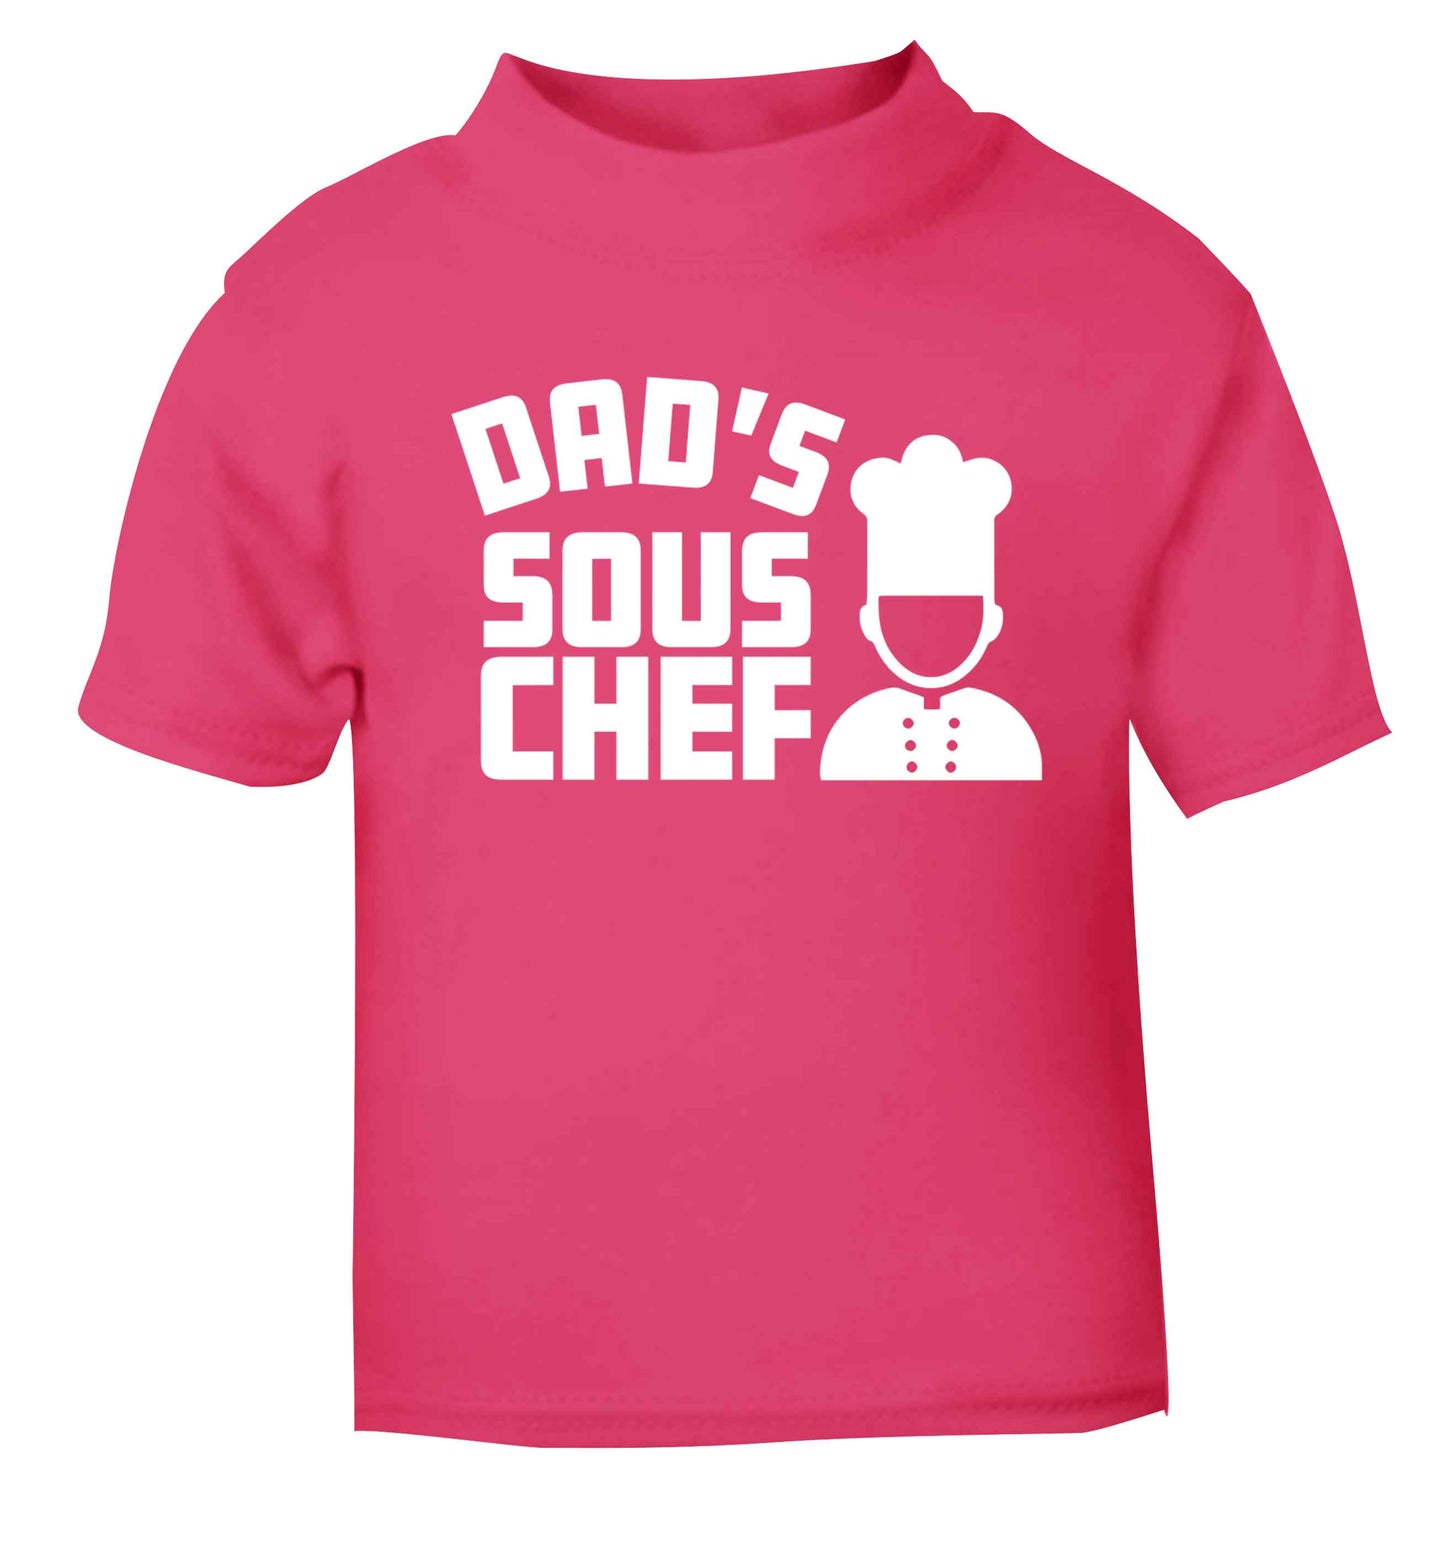 Dad's sous chef pink baby toddler Tshirt 2 Years